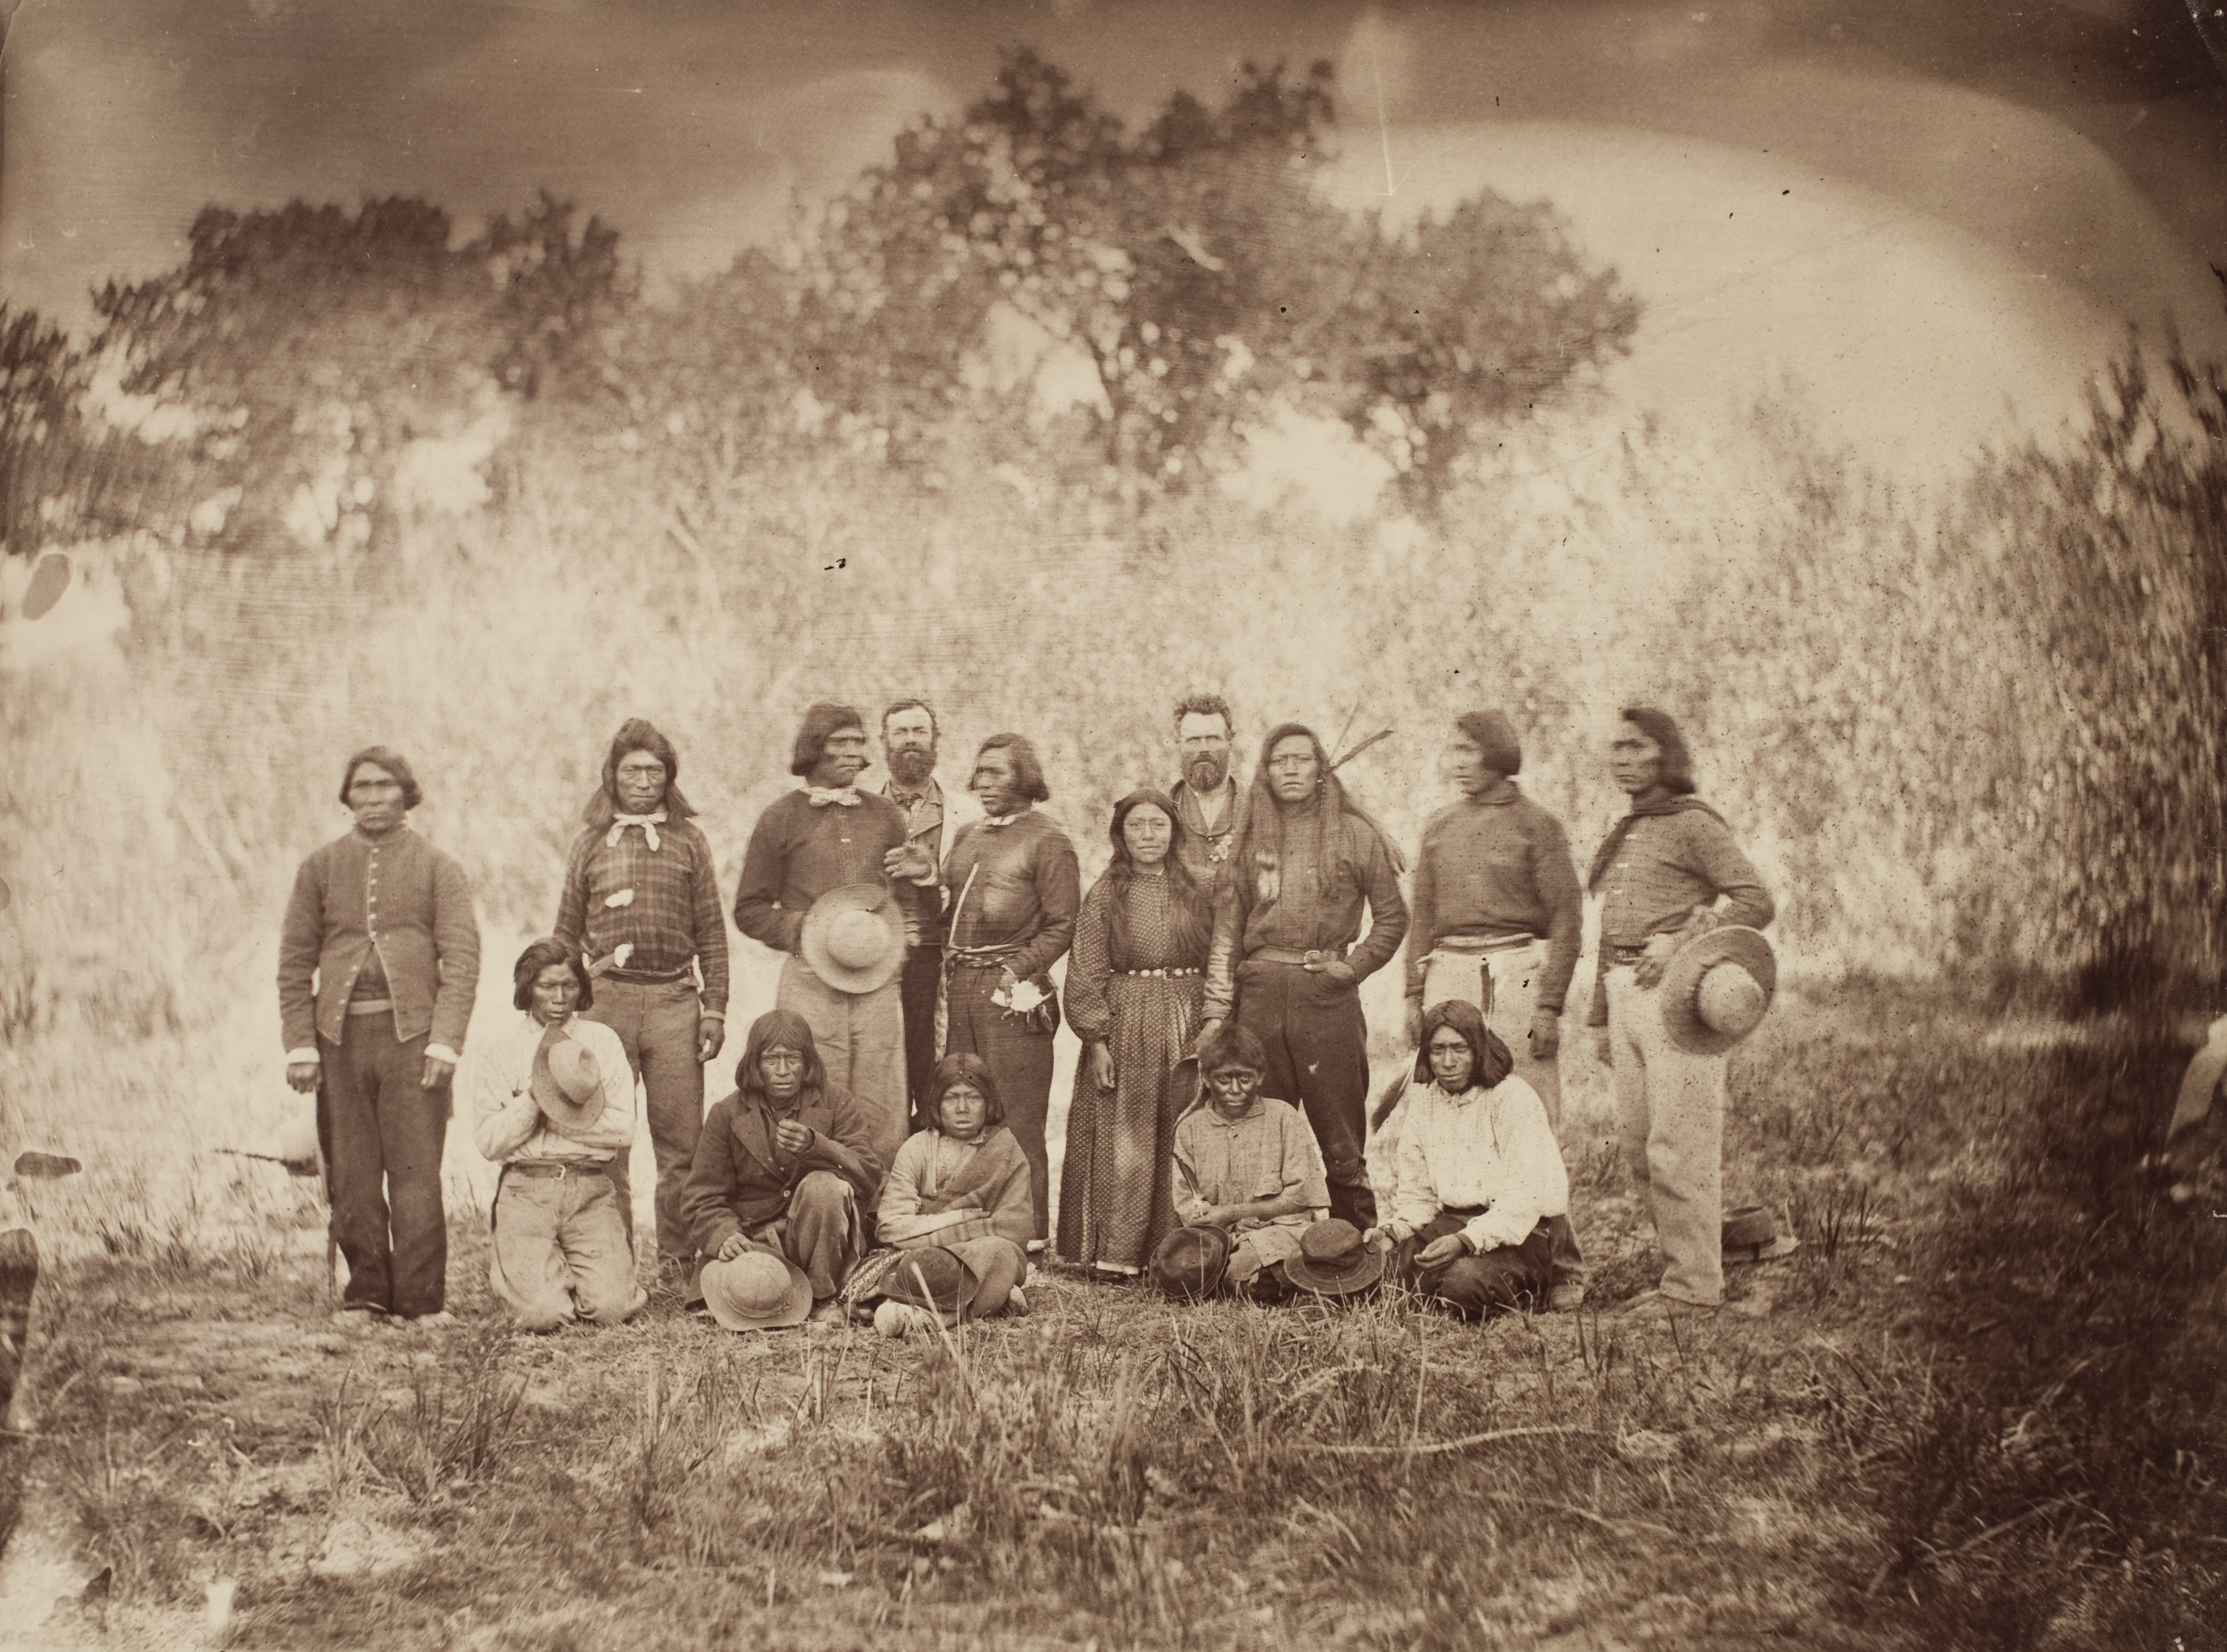 Sepia-toned group photograph of thirteen Native Americans and two Euro-American men in a grassy field, with trees behind them